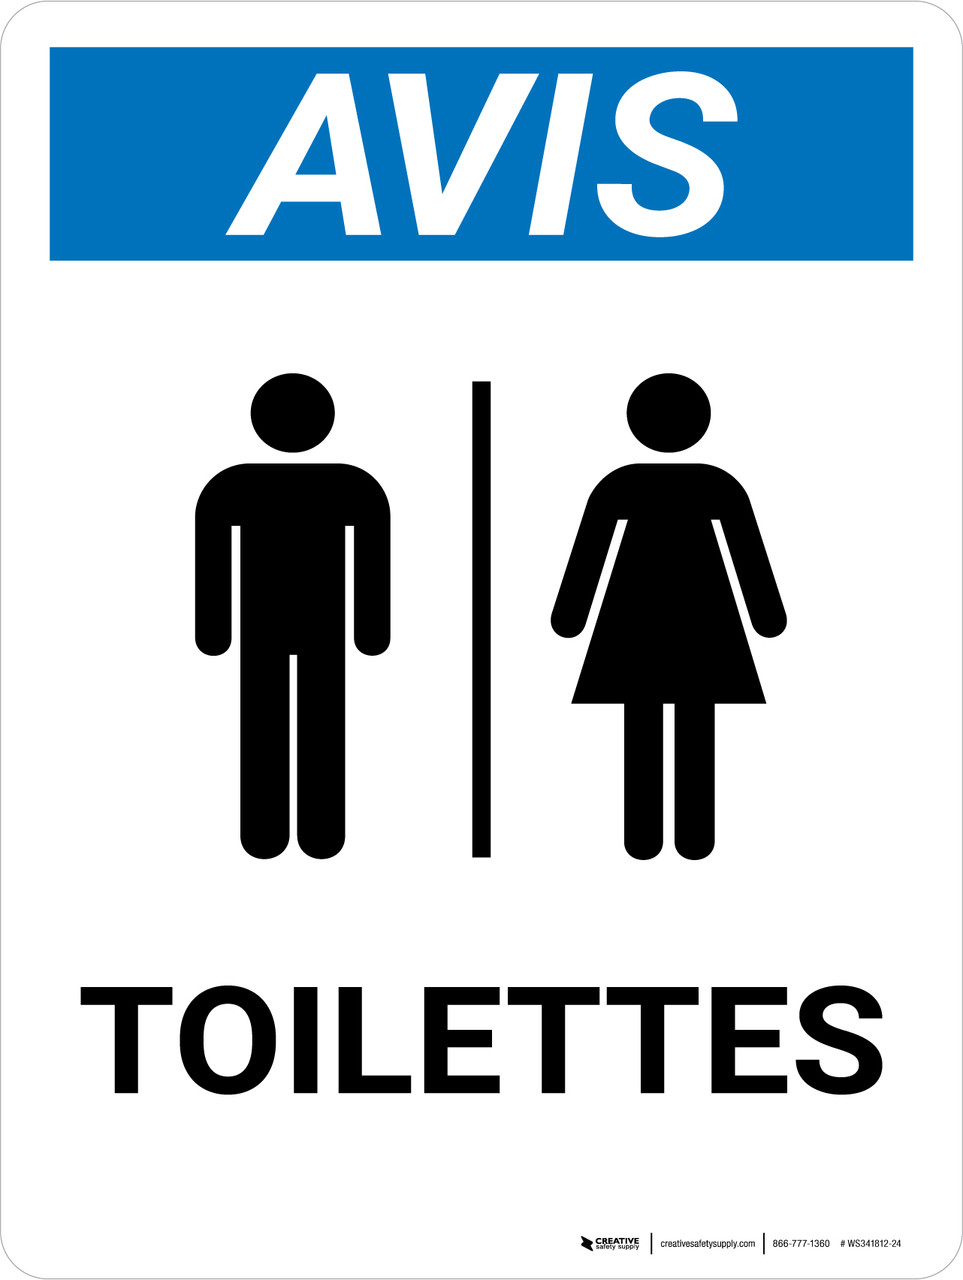 Avis: Toilettes (Notice: Restrooms) Portrait French - Wall Sign